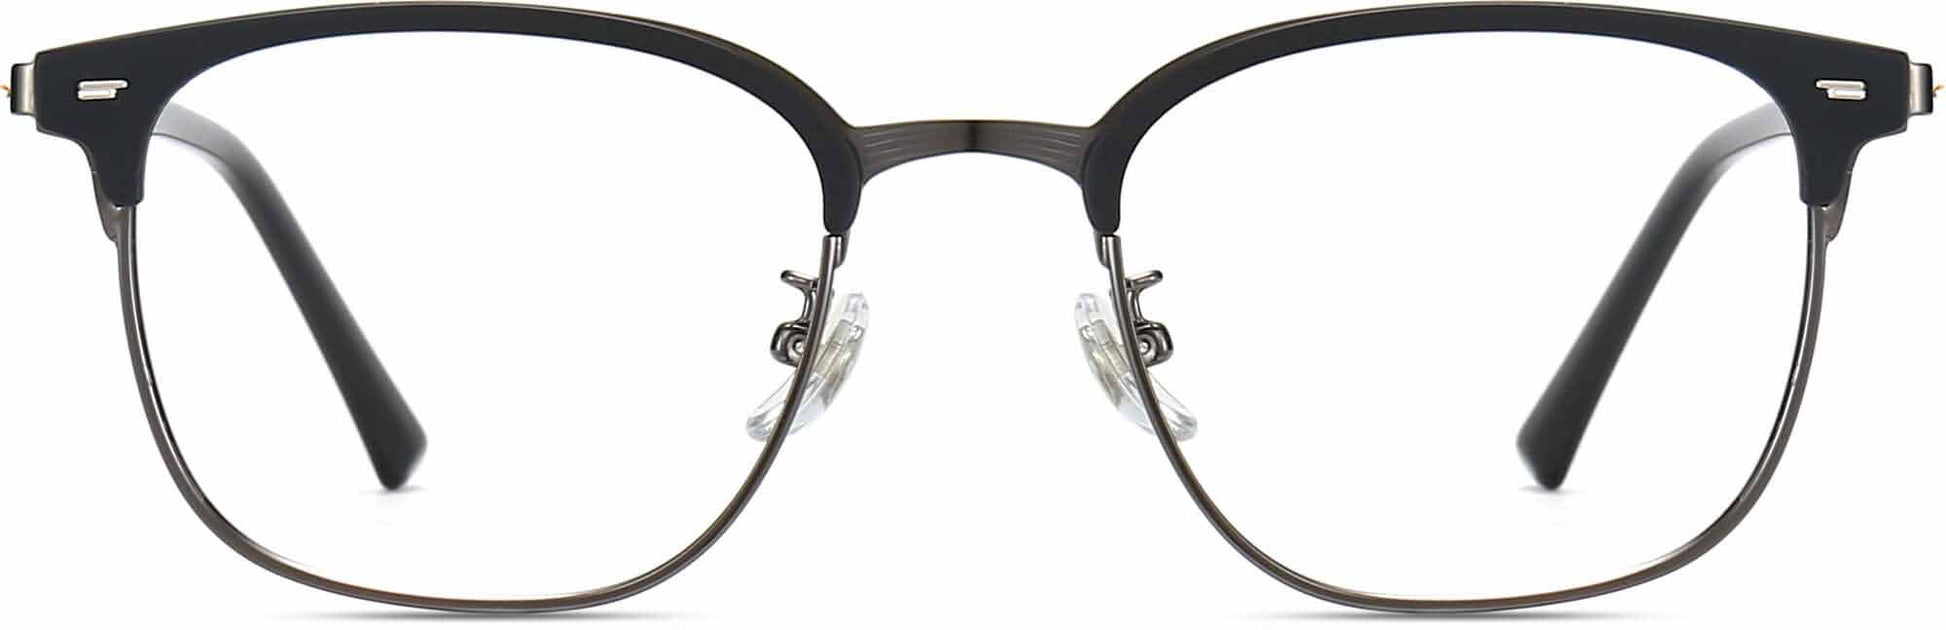 Mdonne Browline Black Eyeglasses from ANRRI, front view